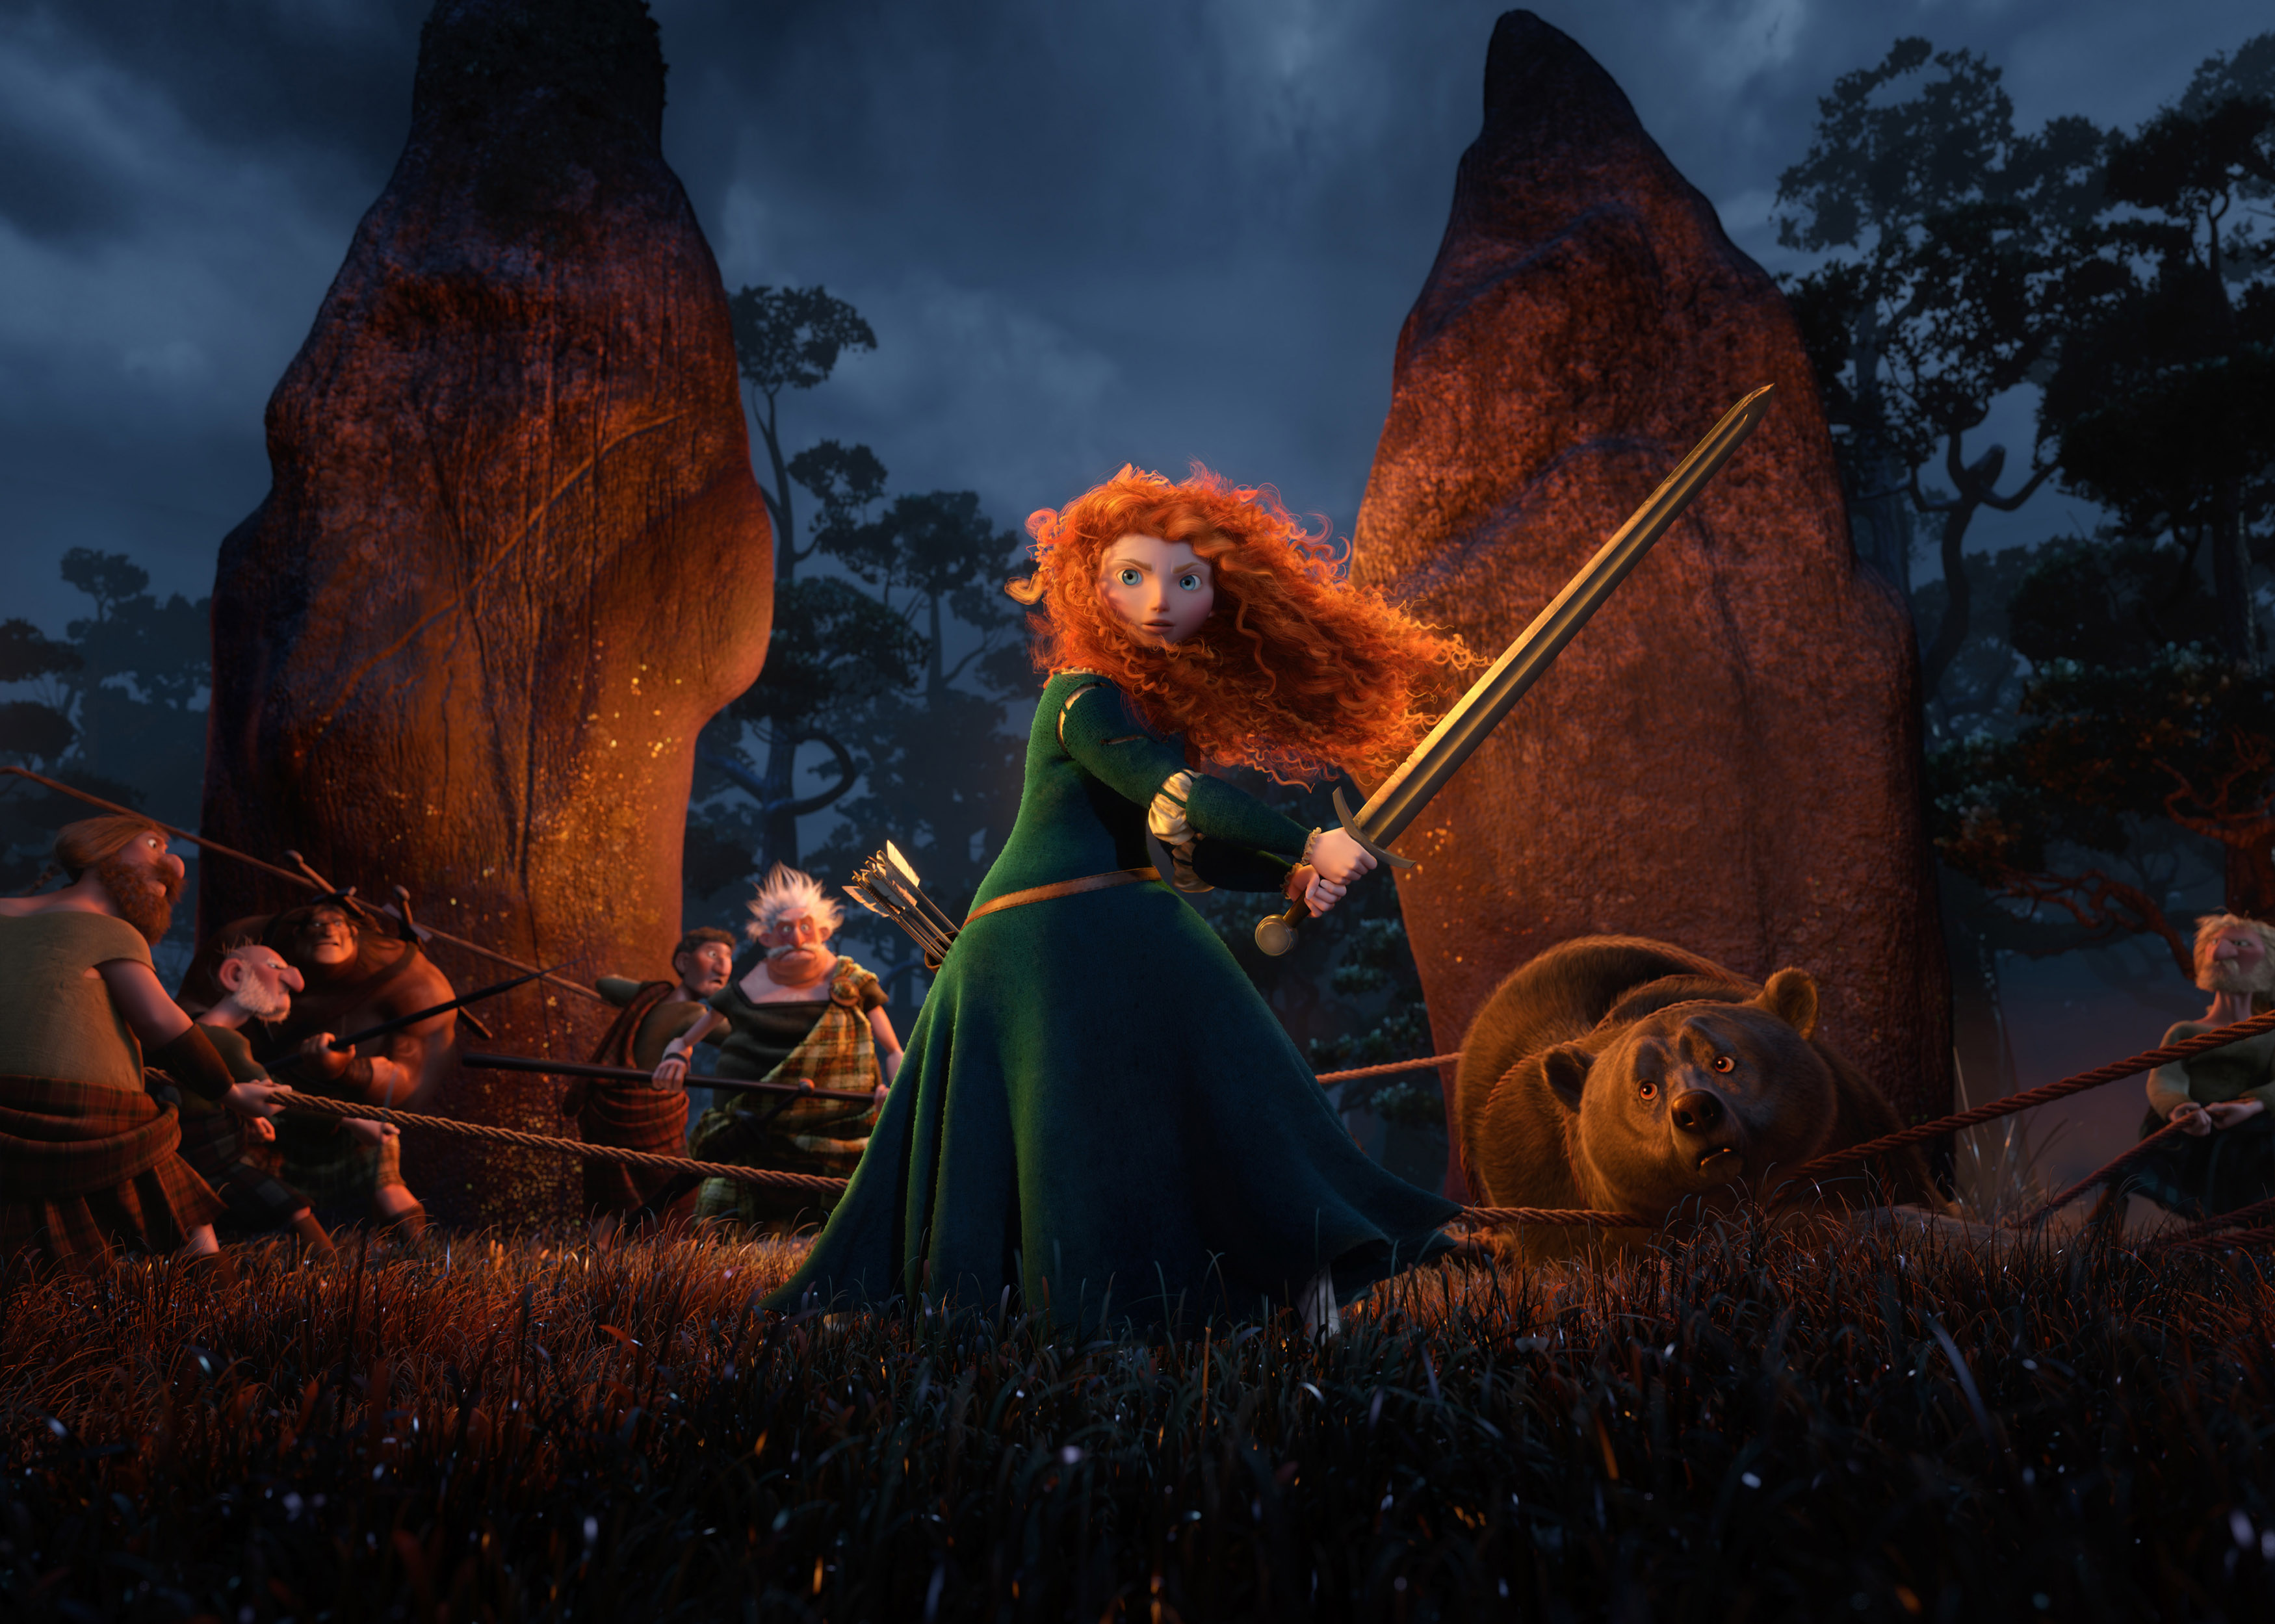 mother and merida brave